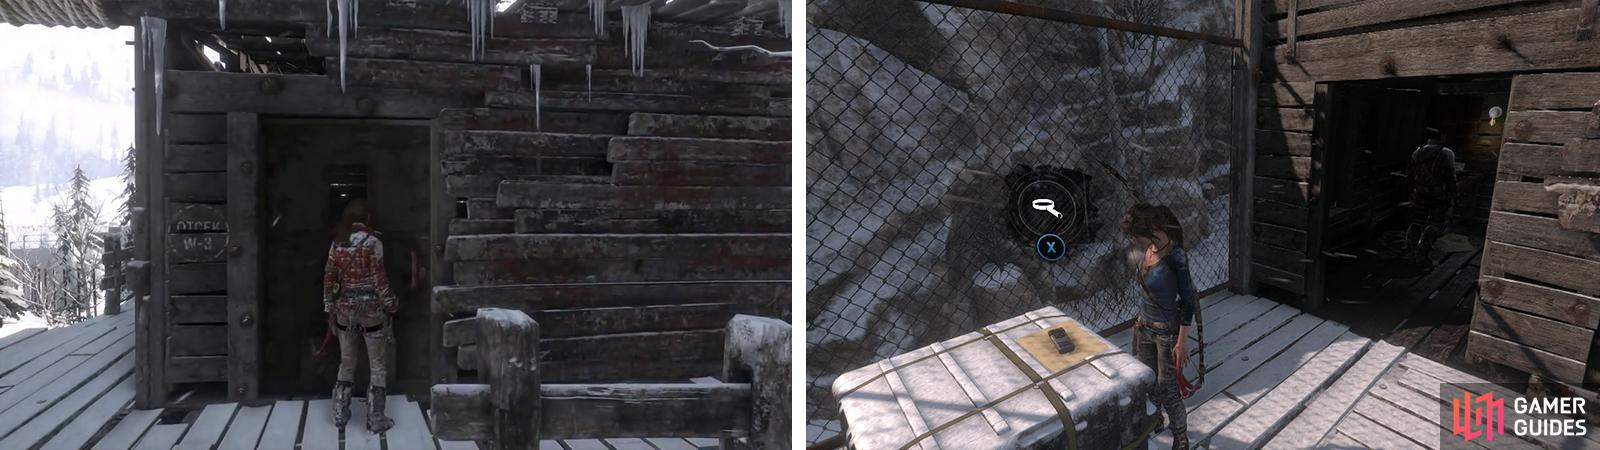 Enter the supply shack (left) to find the Byzantine Coin vendor. Upon exiting the far side loot Document 10 (right) before ziplining down into the prison.